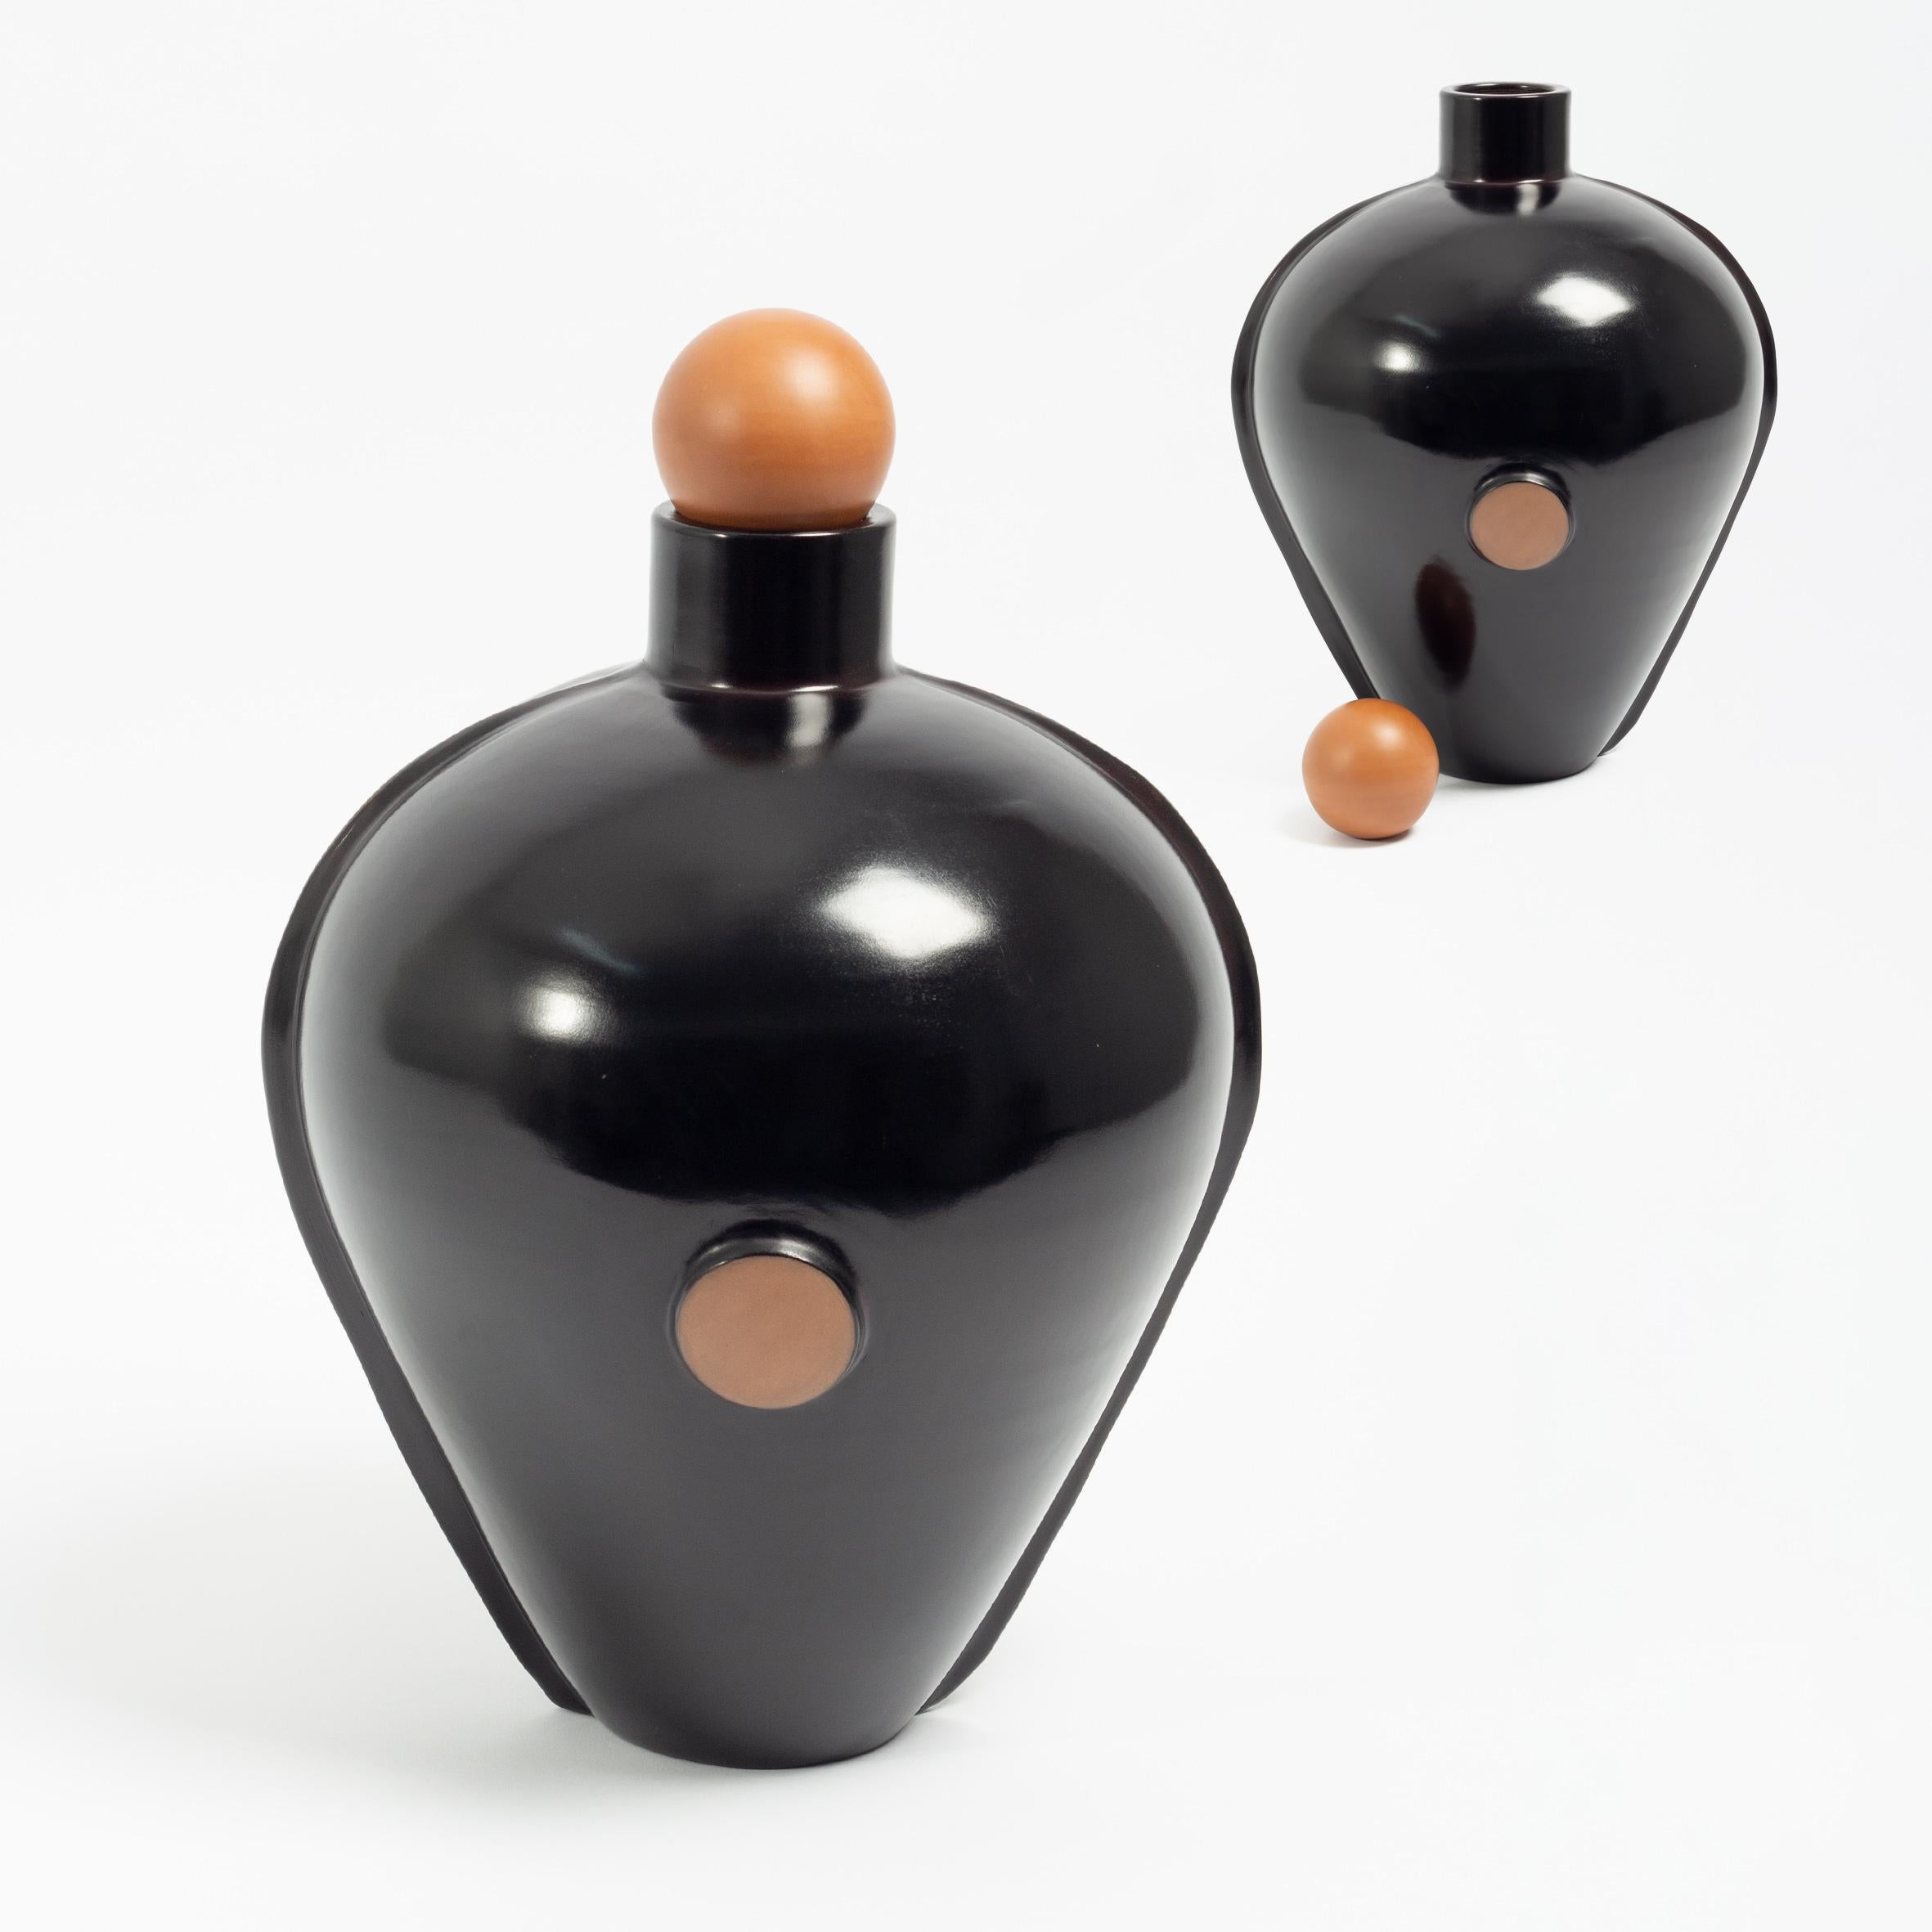 Studio Altar designed a limited edition of contemporary Peruvian pottery that showcases the line of the Vicus ceremonial water vessels, and the tradition of the north Peruvian pottery. The addition of details comes from the inspiration of the